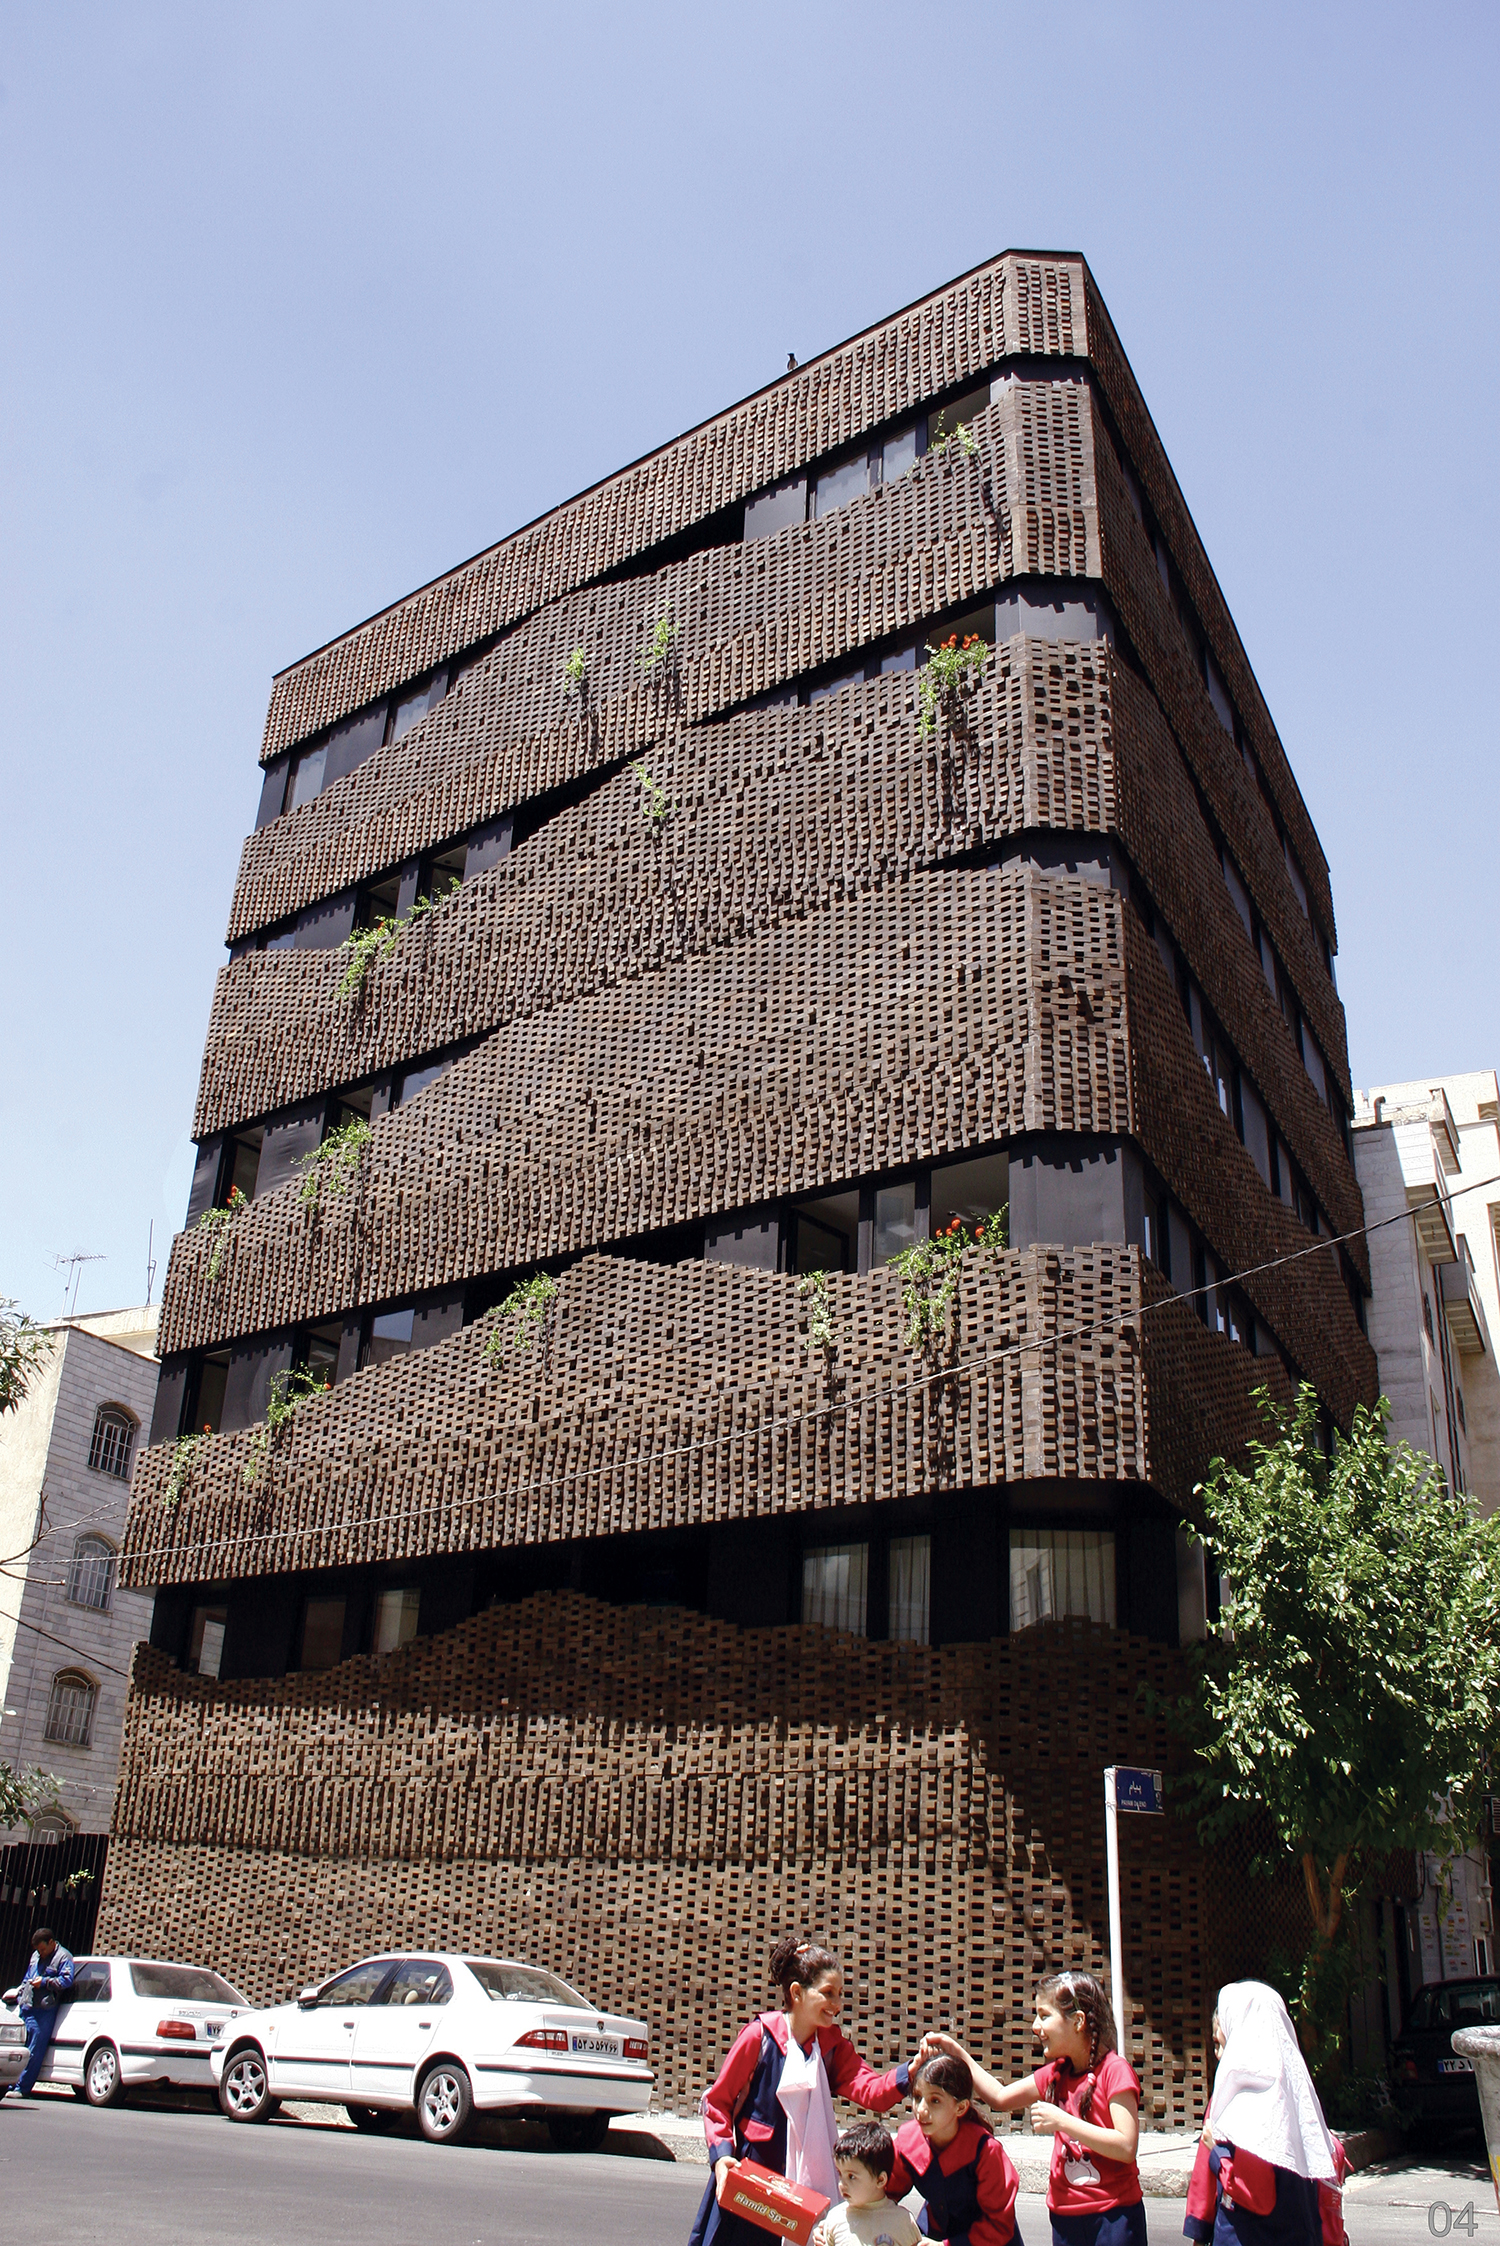 Iranian historic traditions of Persian carpets and building bricks were fused into a contemporary facade that appears as a collection of intricately interwoven modules
